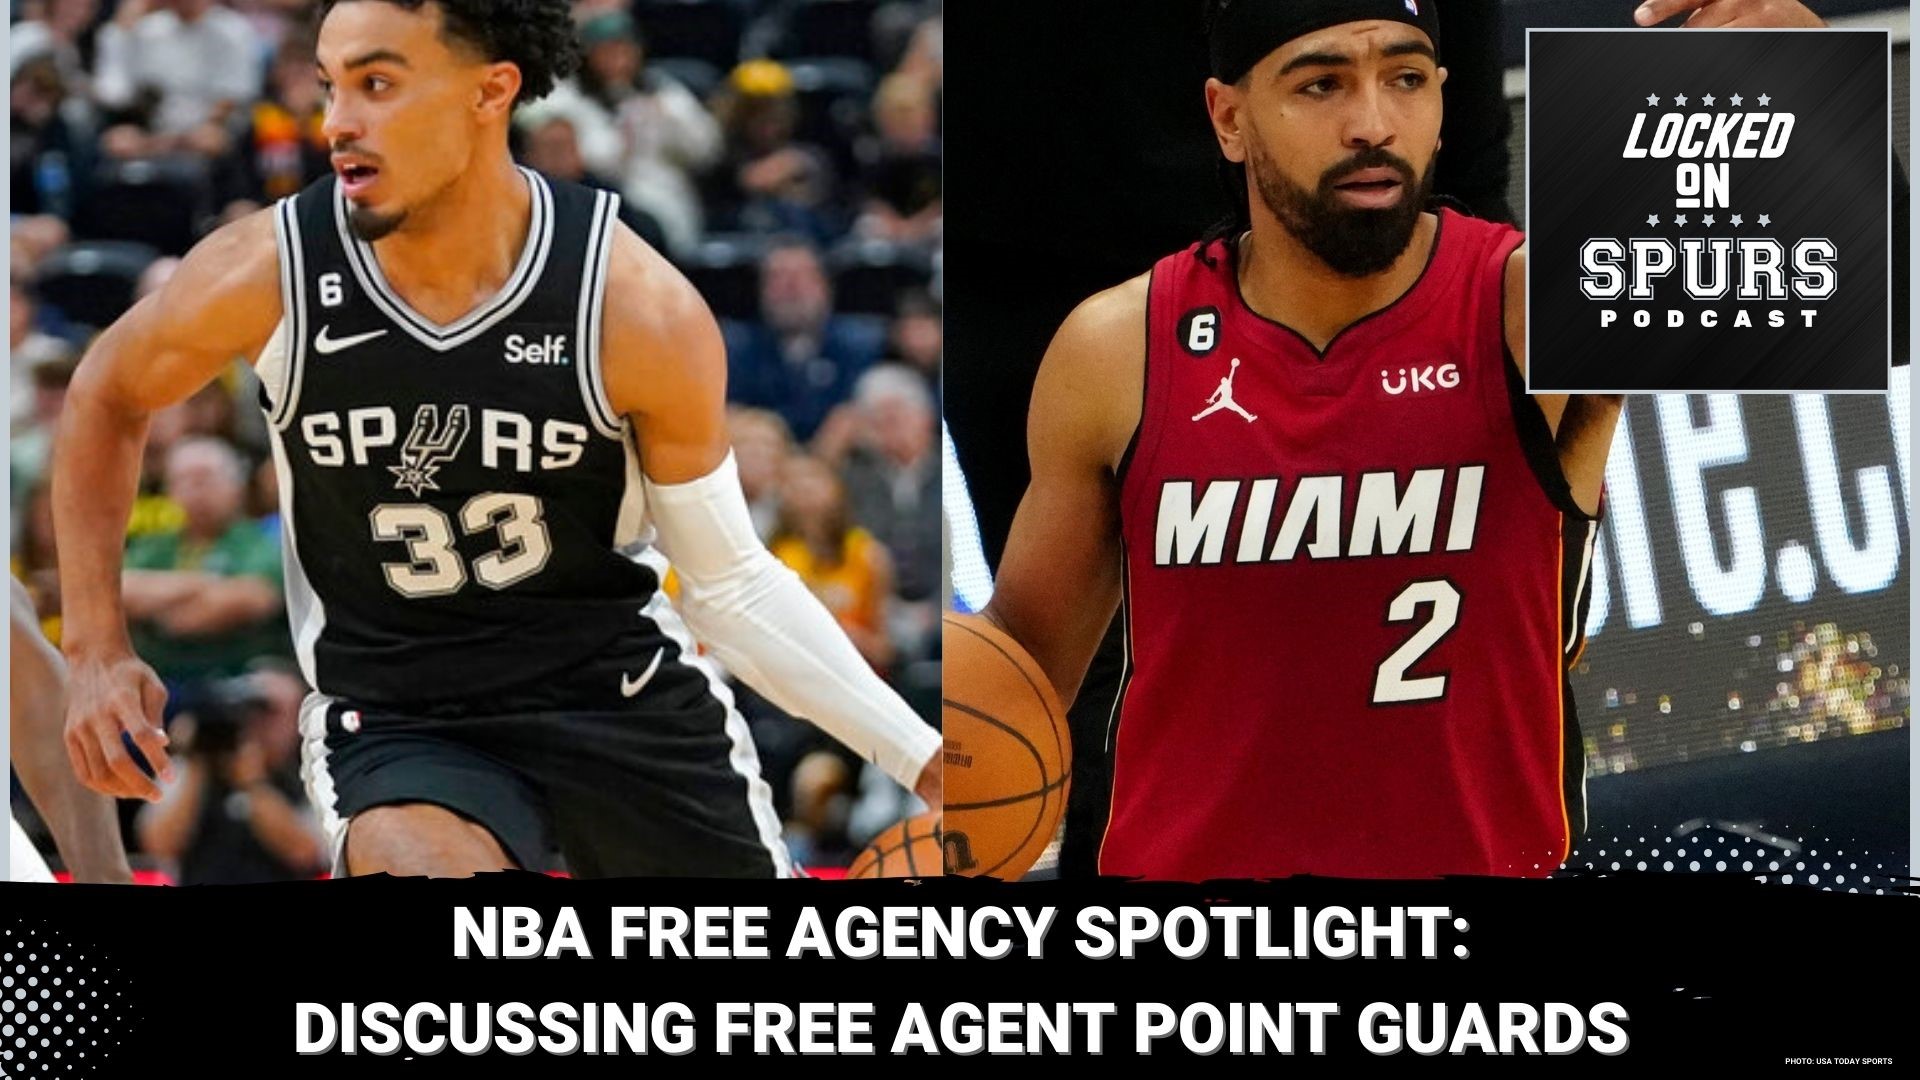 Let's look at available free-agent point guards the Spurs could target.